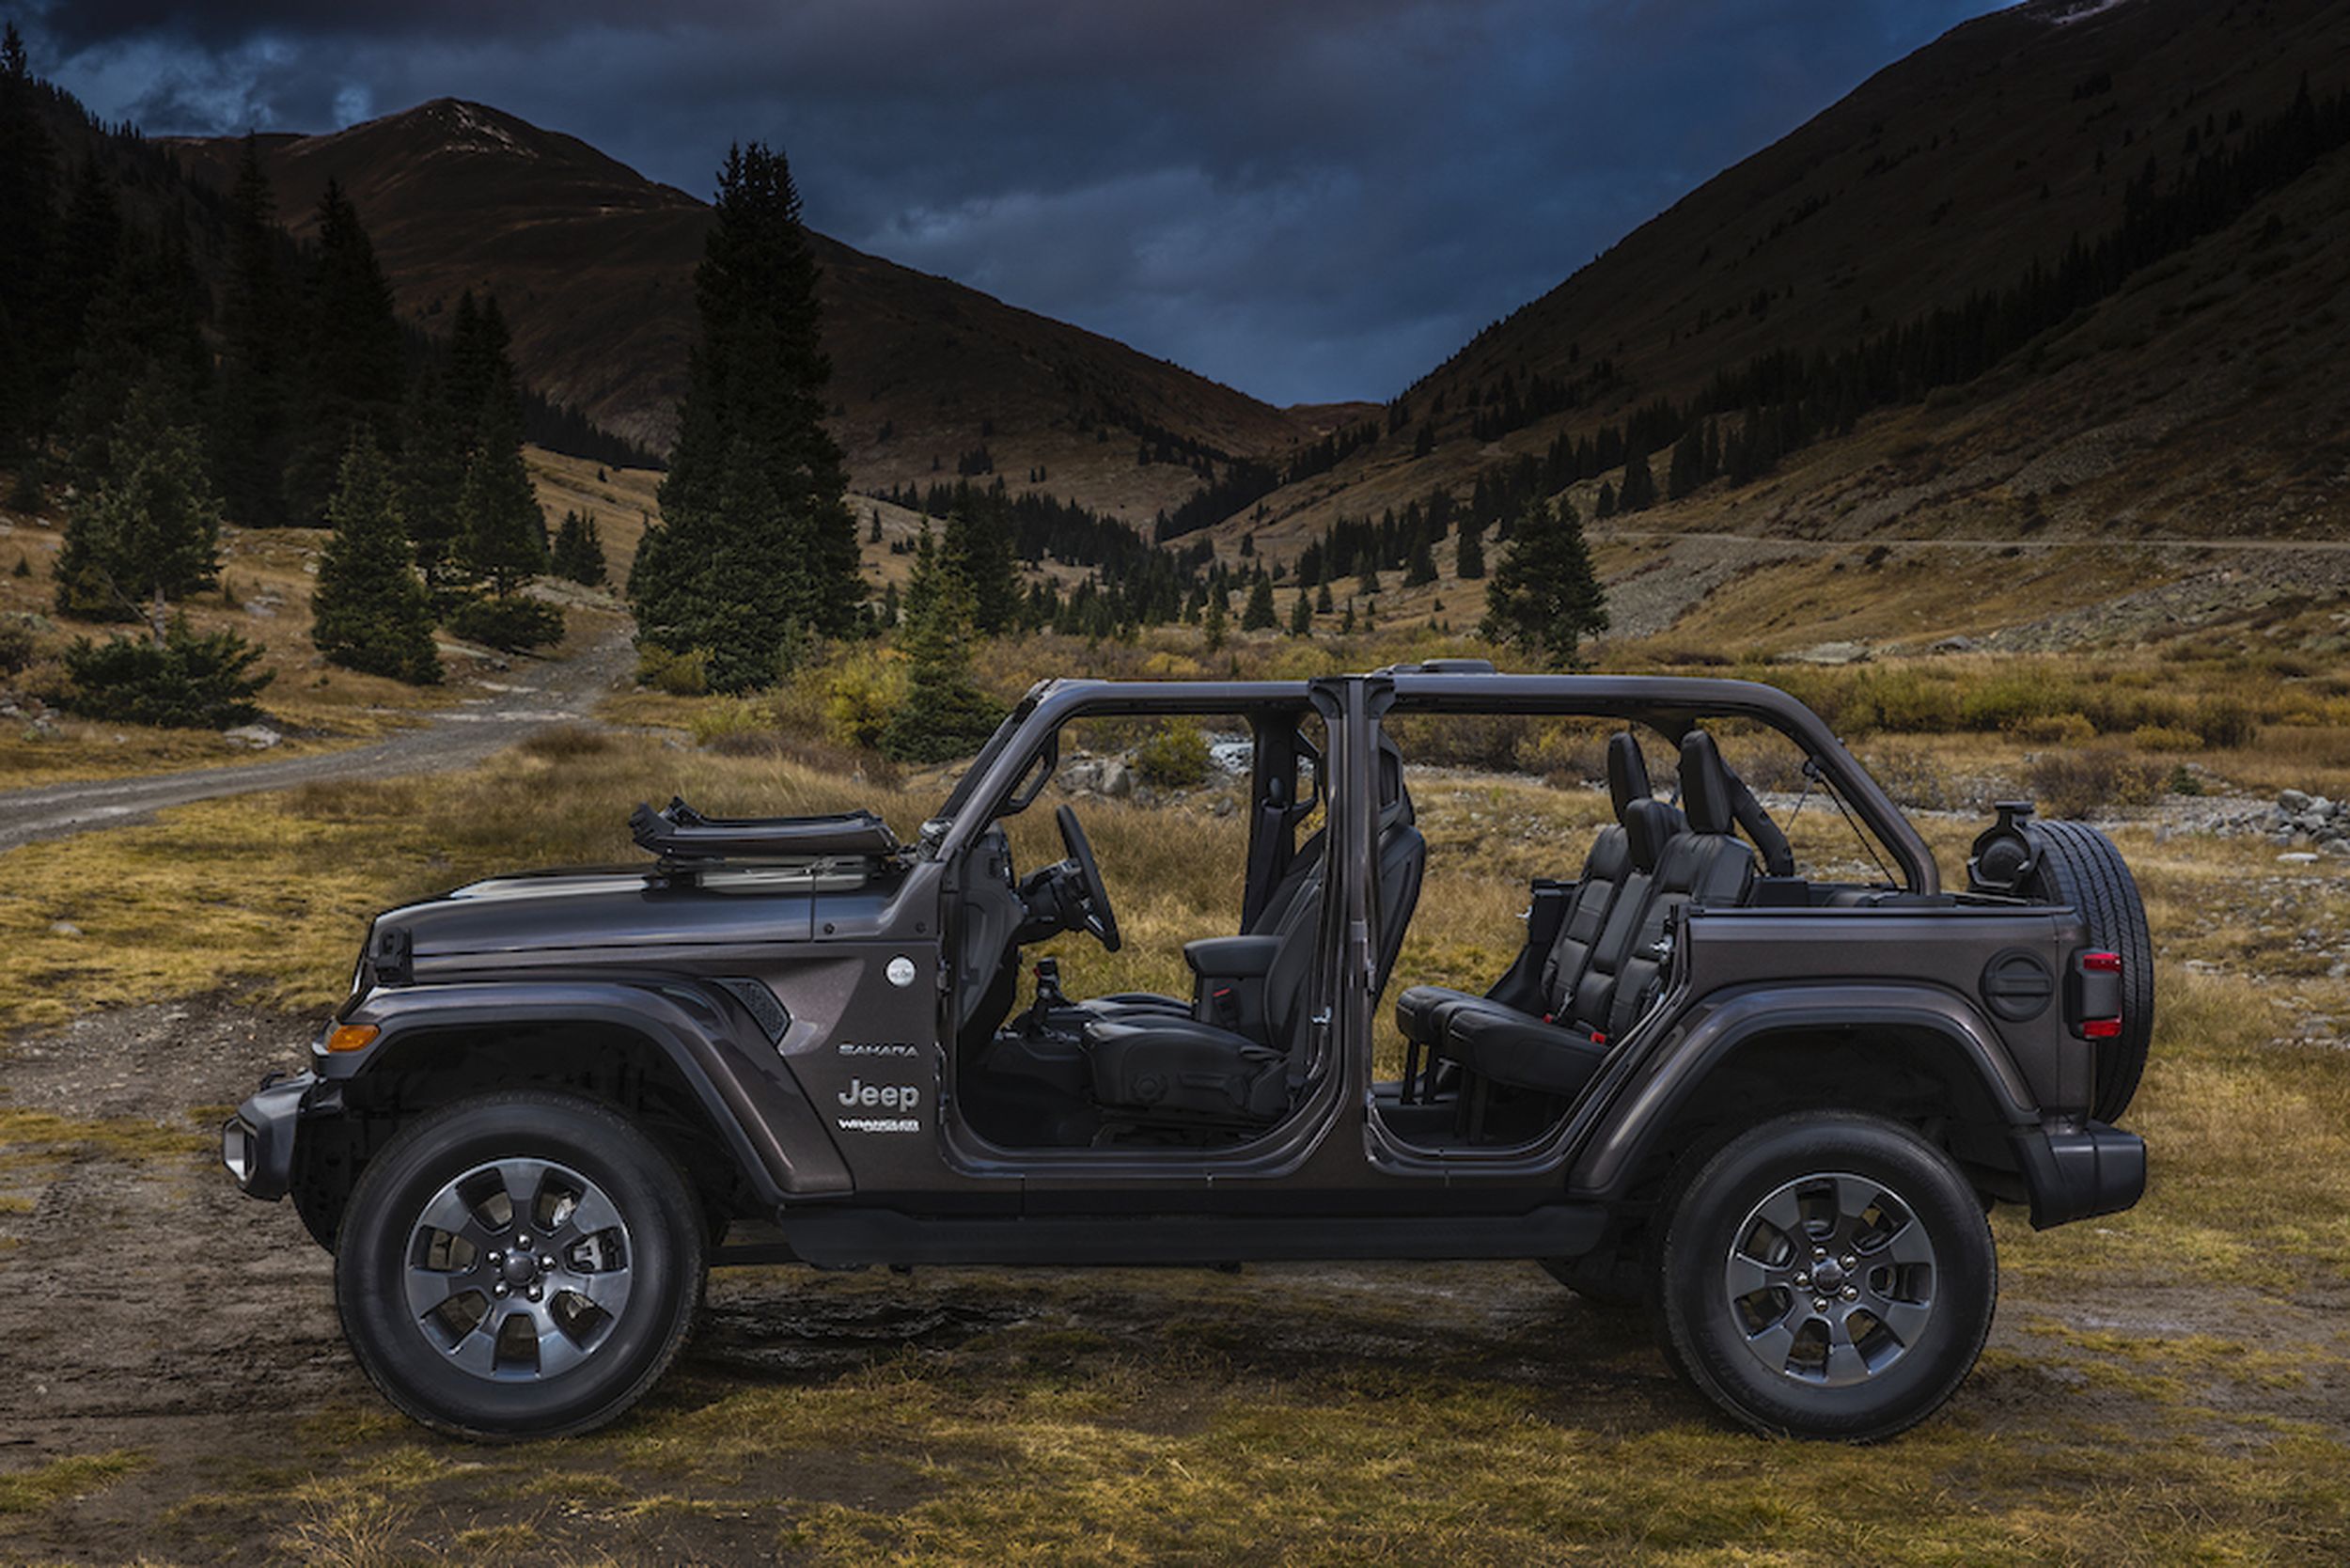 2019 Jeep Wrangler Unlimited: There's only one way to order your Wrangler —  rough and ready | The Spokesman-Review